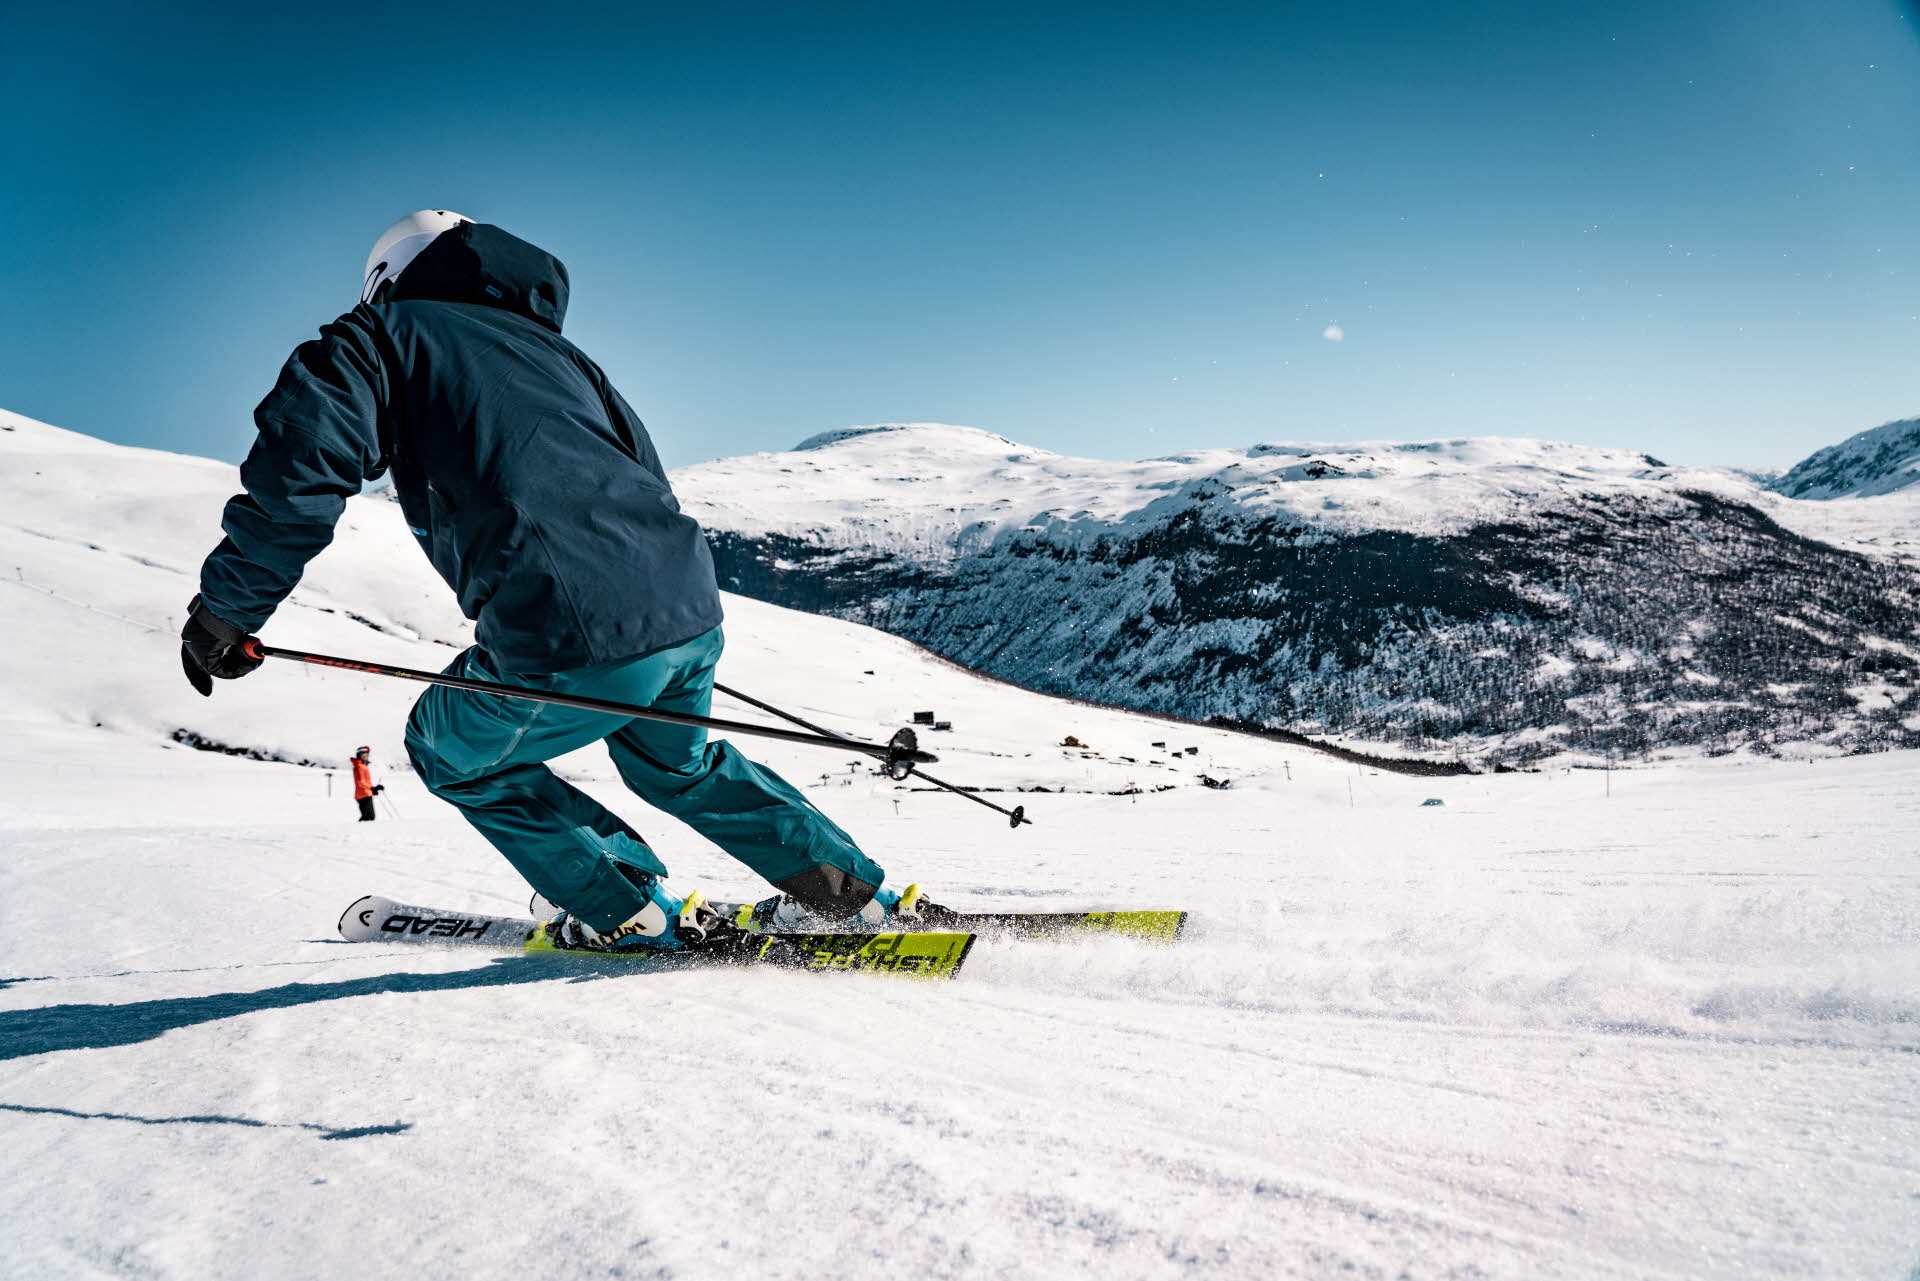 A man in a blue outfit skiing on a prepared slope in Myrkdalen